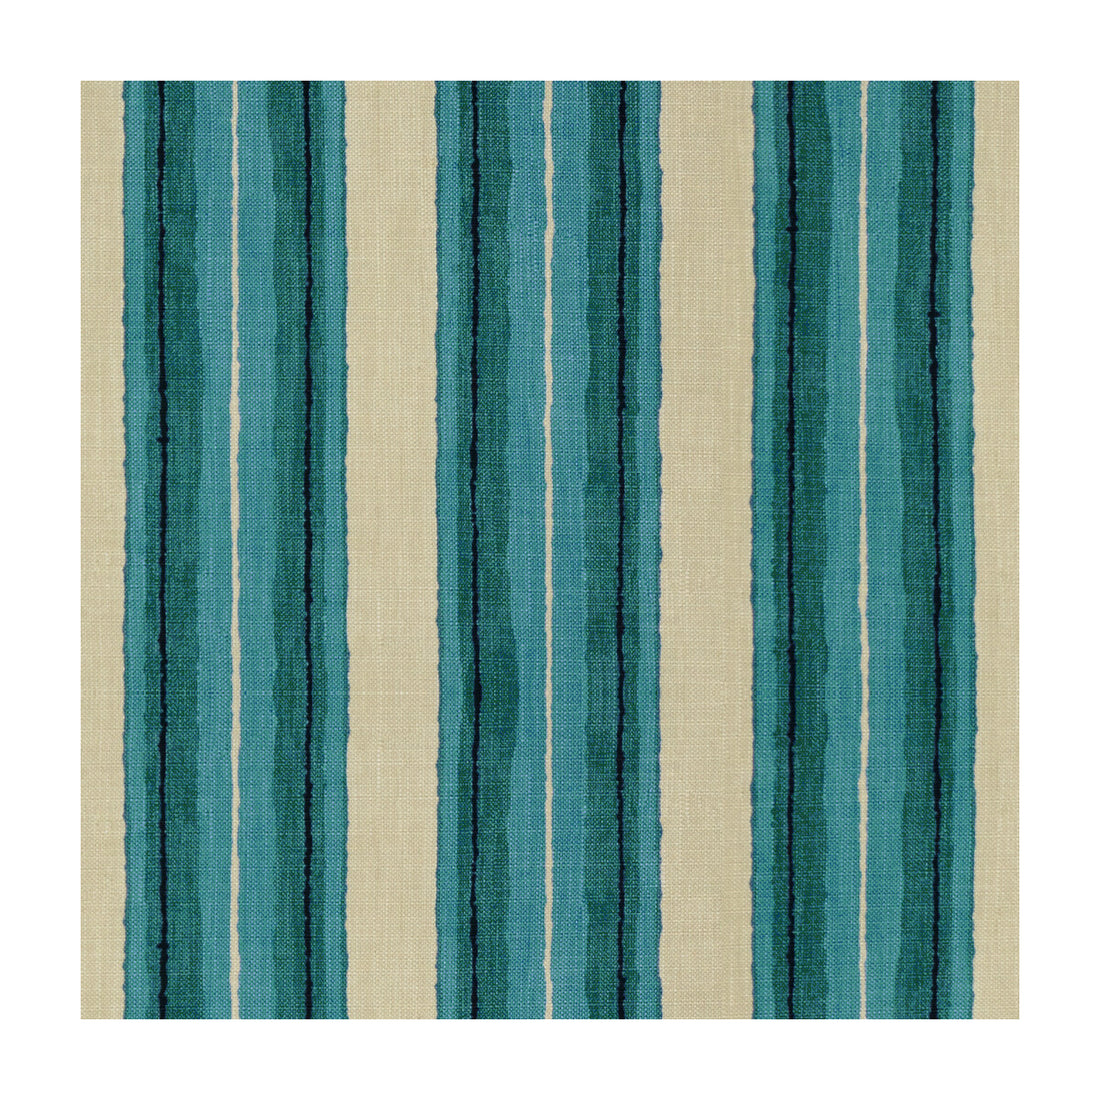 Shoreline fabric in pacific color - pattern GWF-3426.55.0 - by Lee Jofa Modern in the Kelly Wearstler Terra Firma Textiles collection